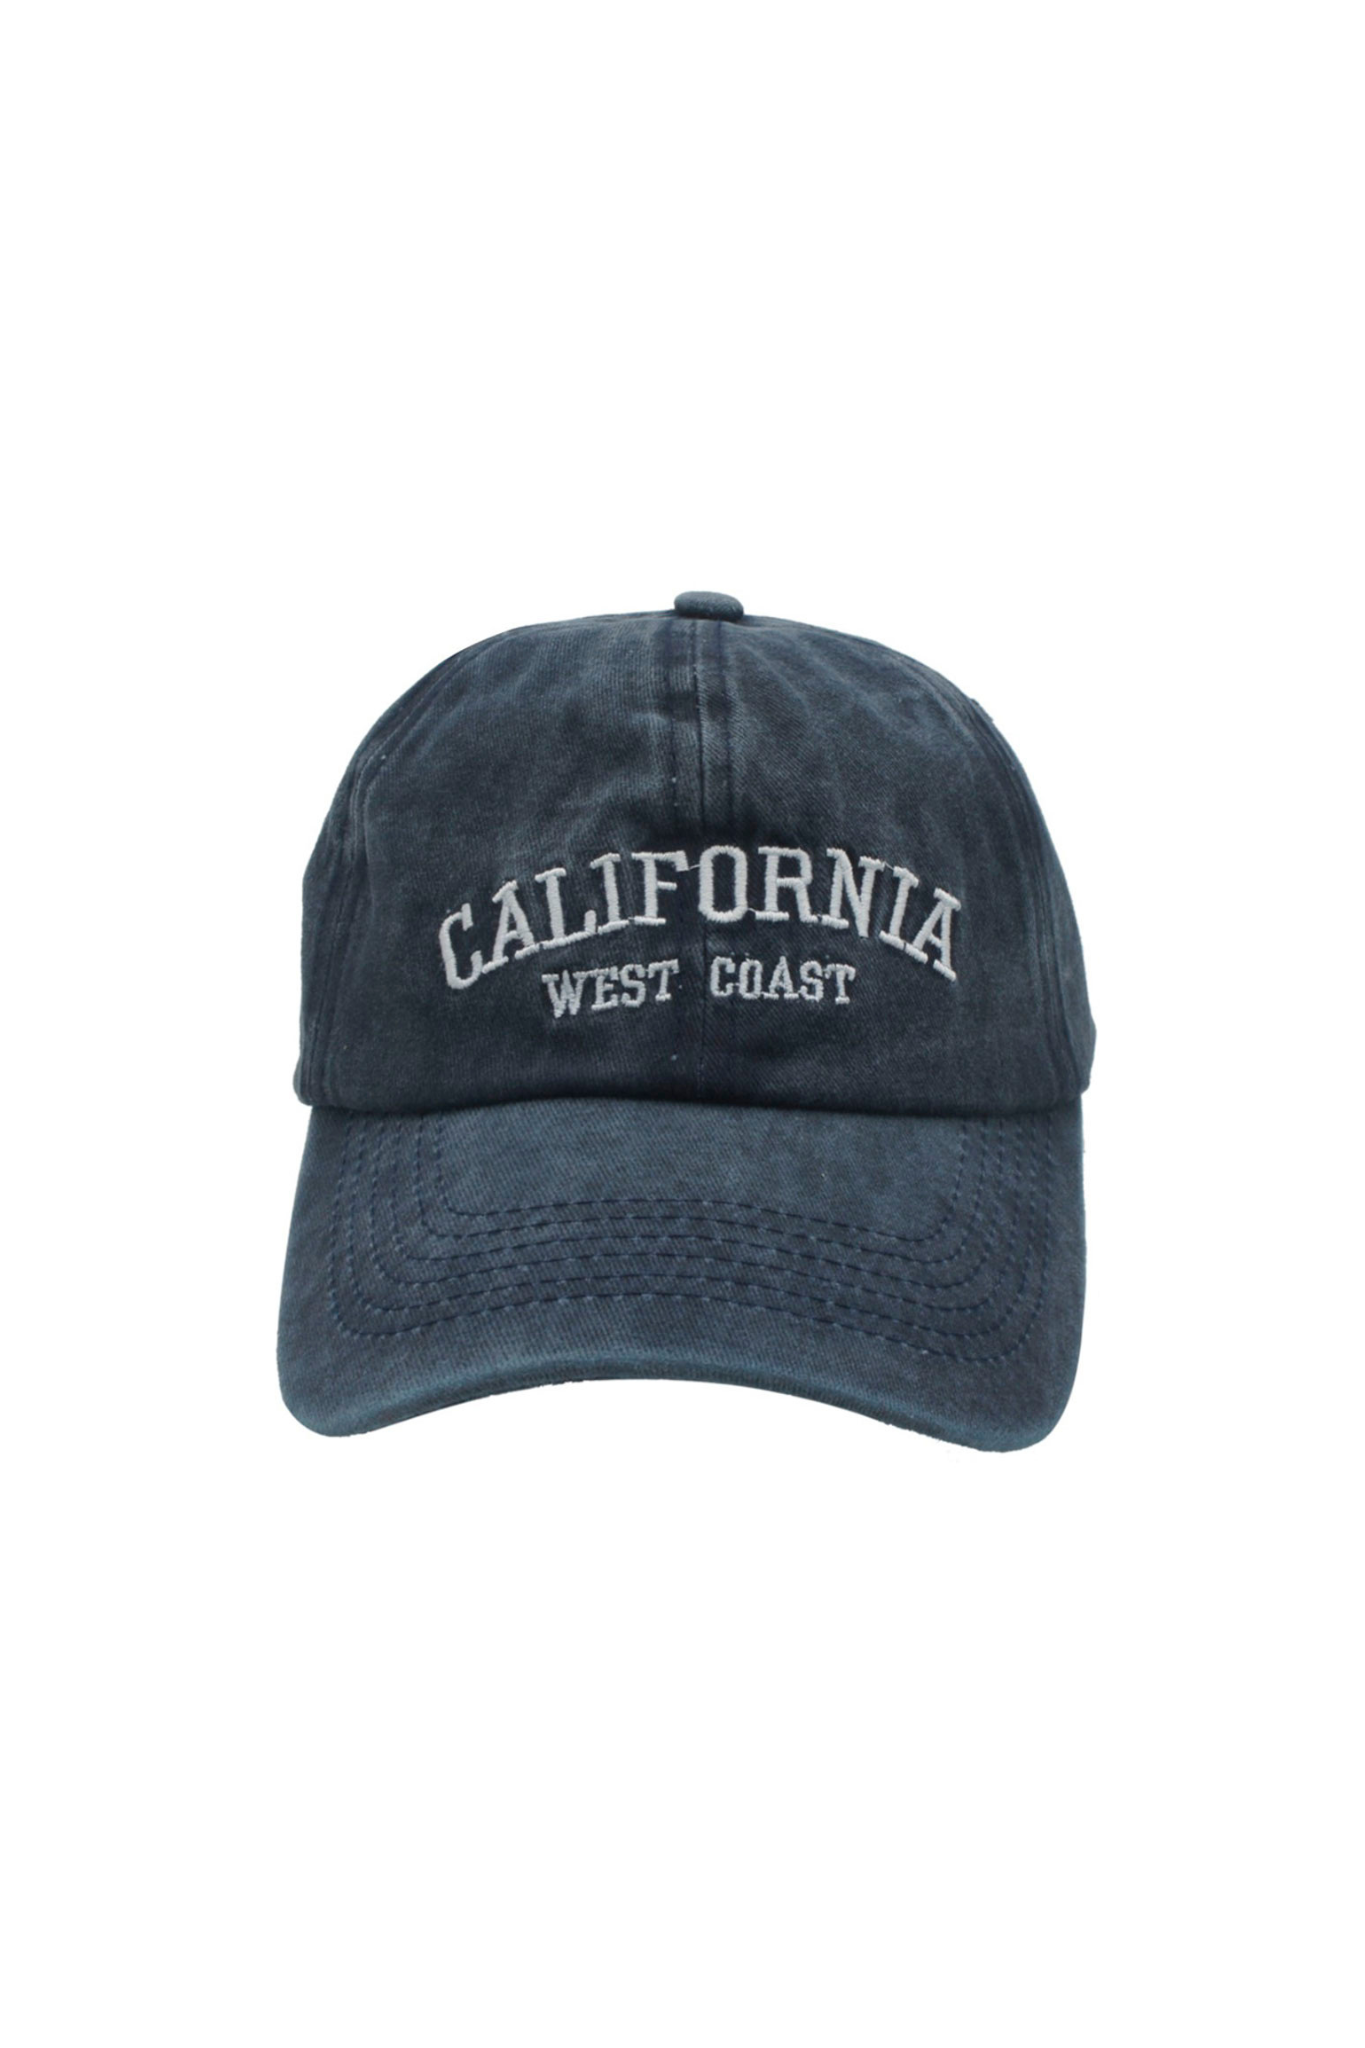 California West Coast Washed Cap in Navy